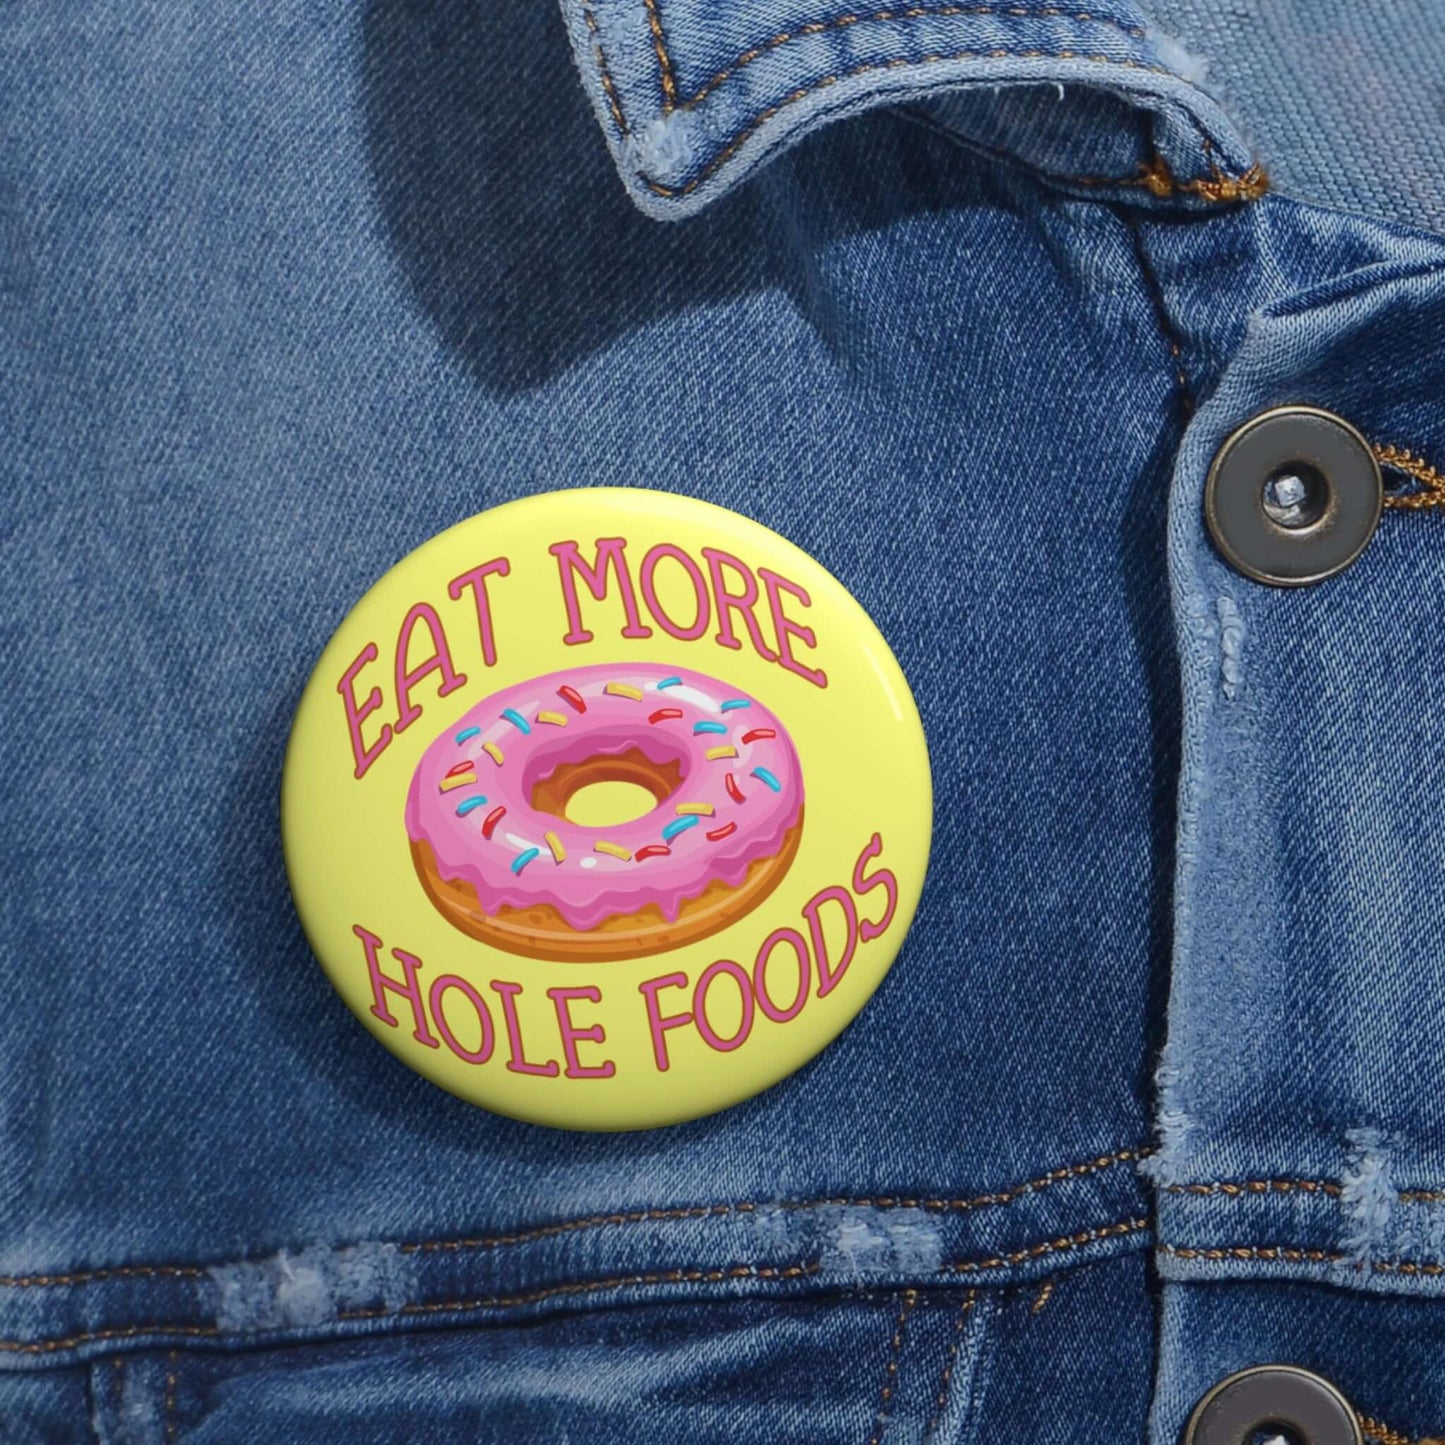 Donut pun pinback button. Eat more hole whole foods.